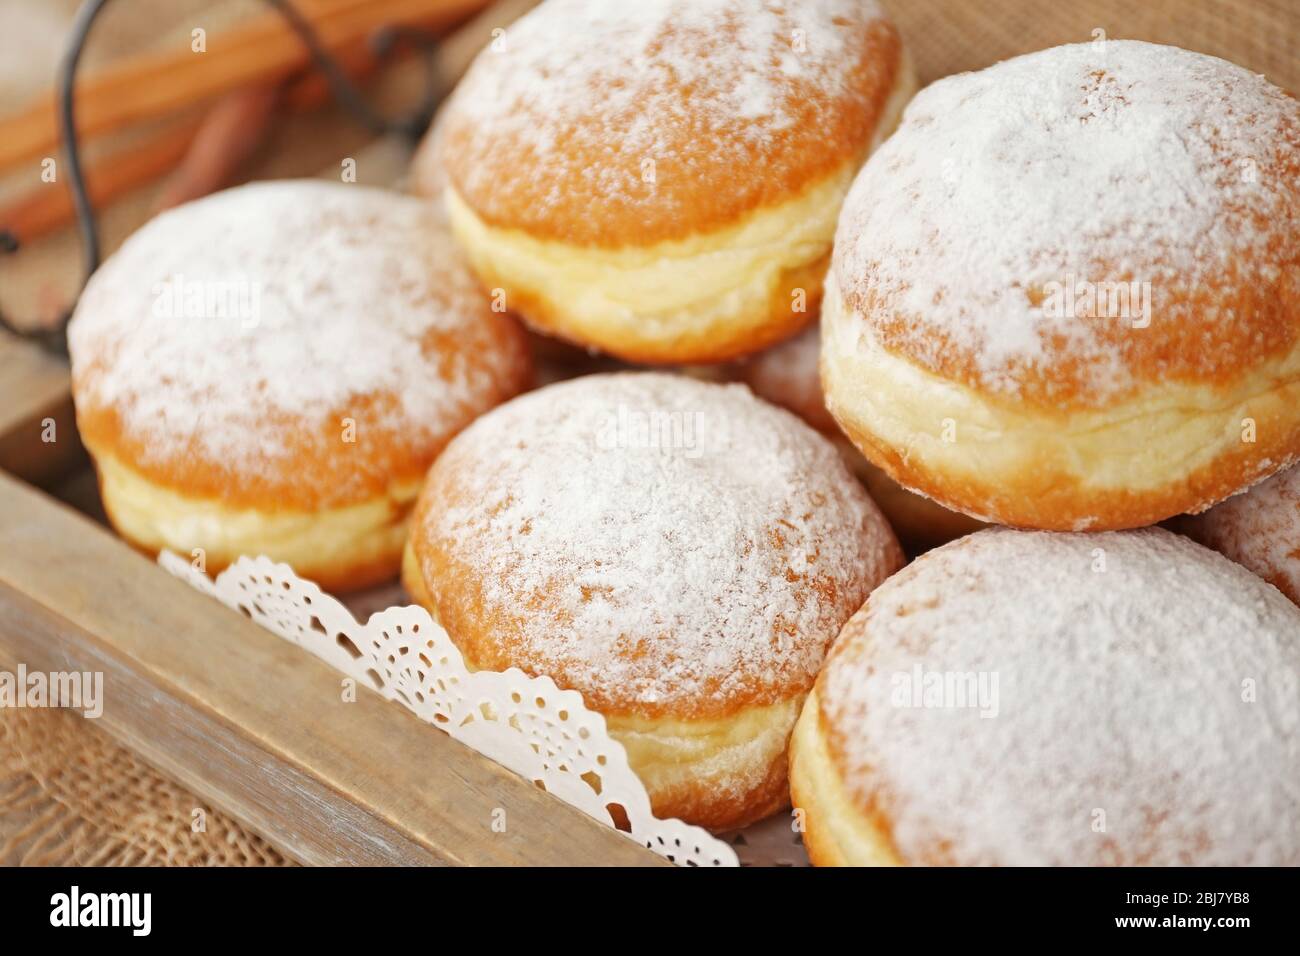 Delicious sugary donuts in wooden tray closeup Stock Photo